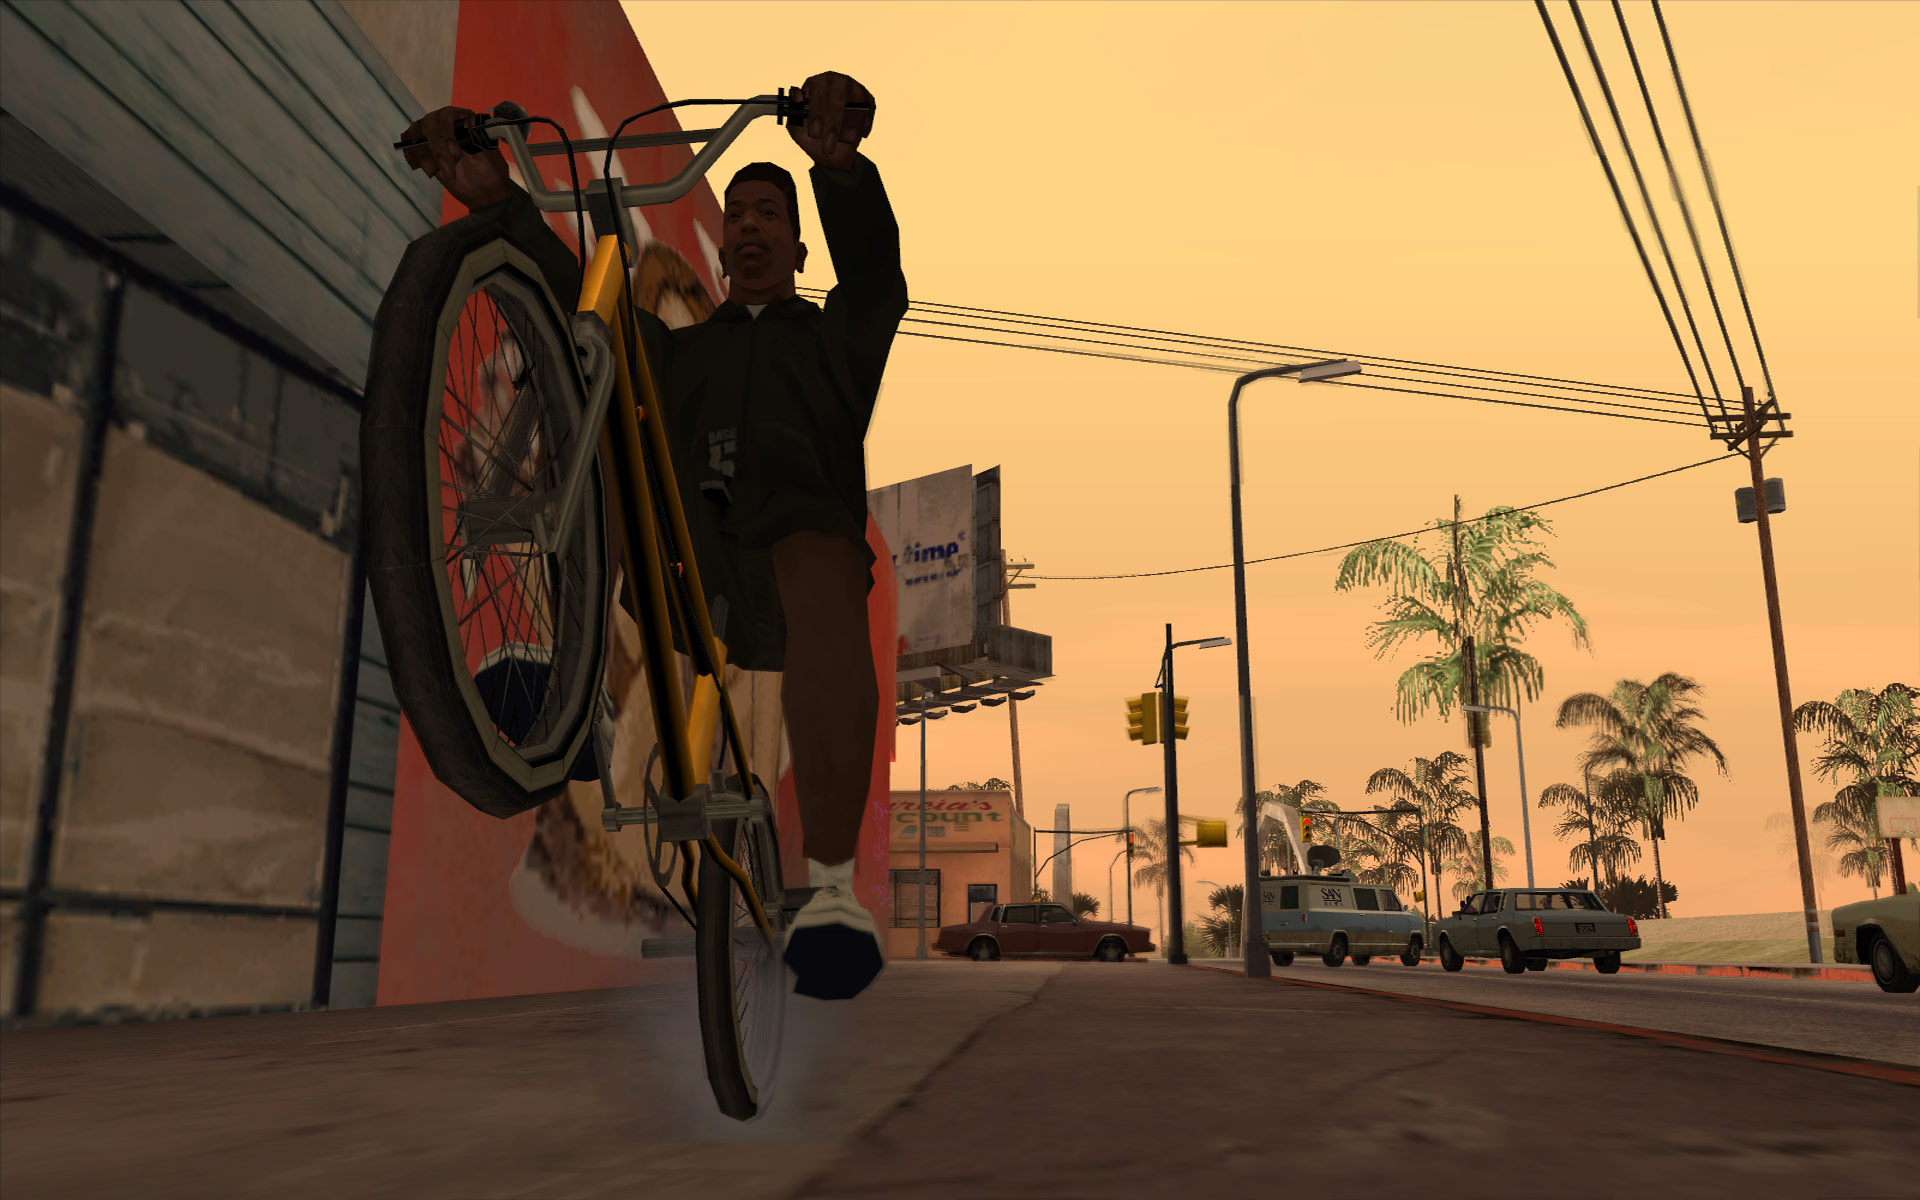 GTA San Andreas Steam update removes songs, resolution options  PC Gamer